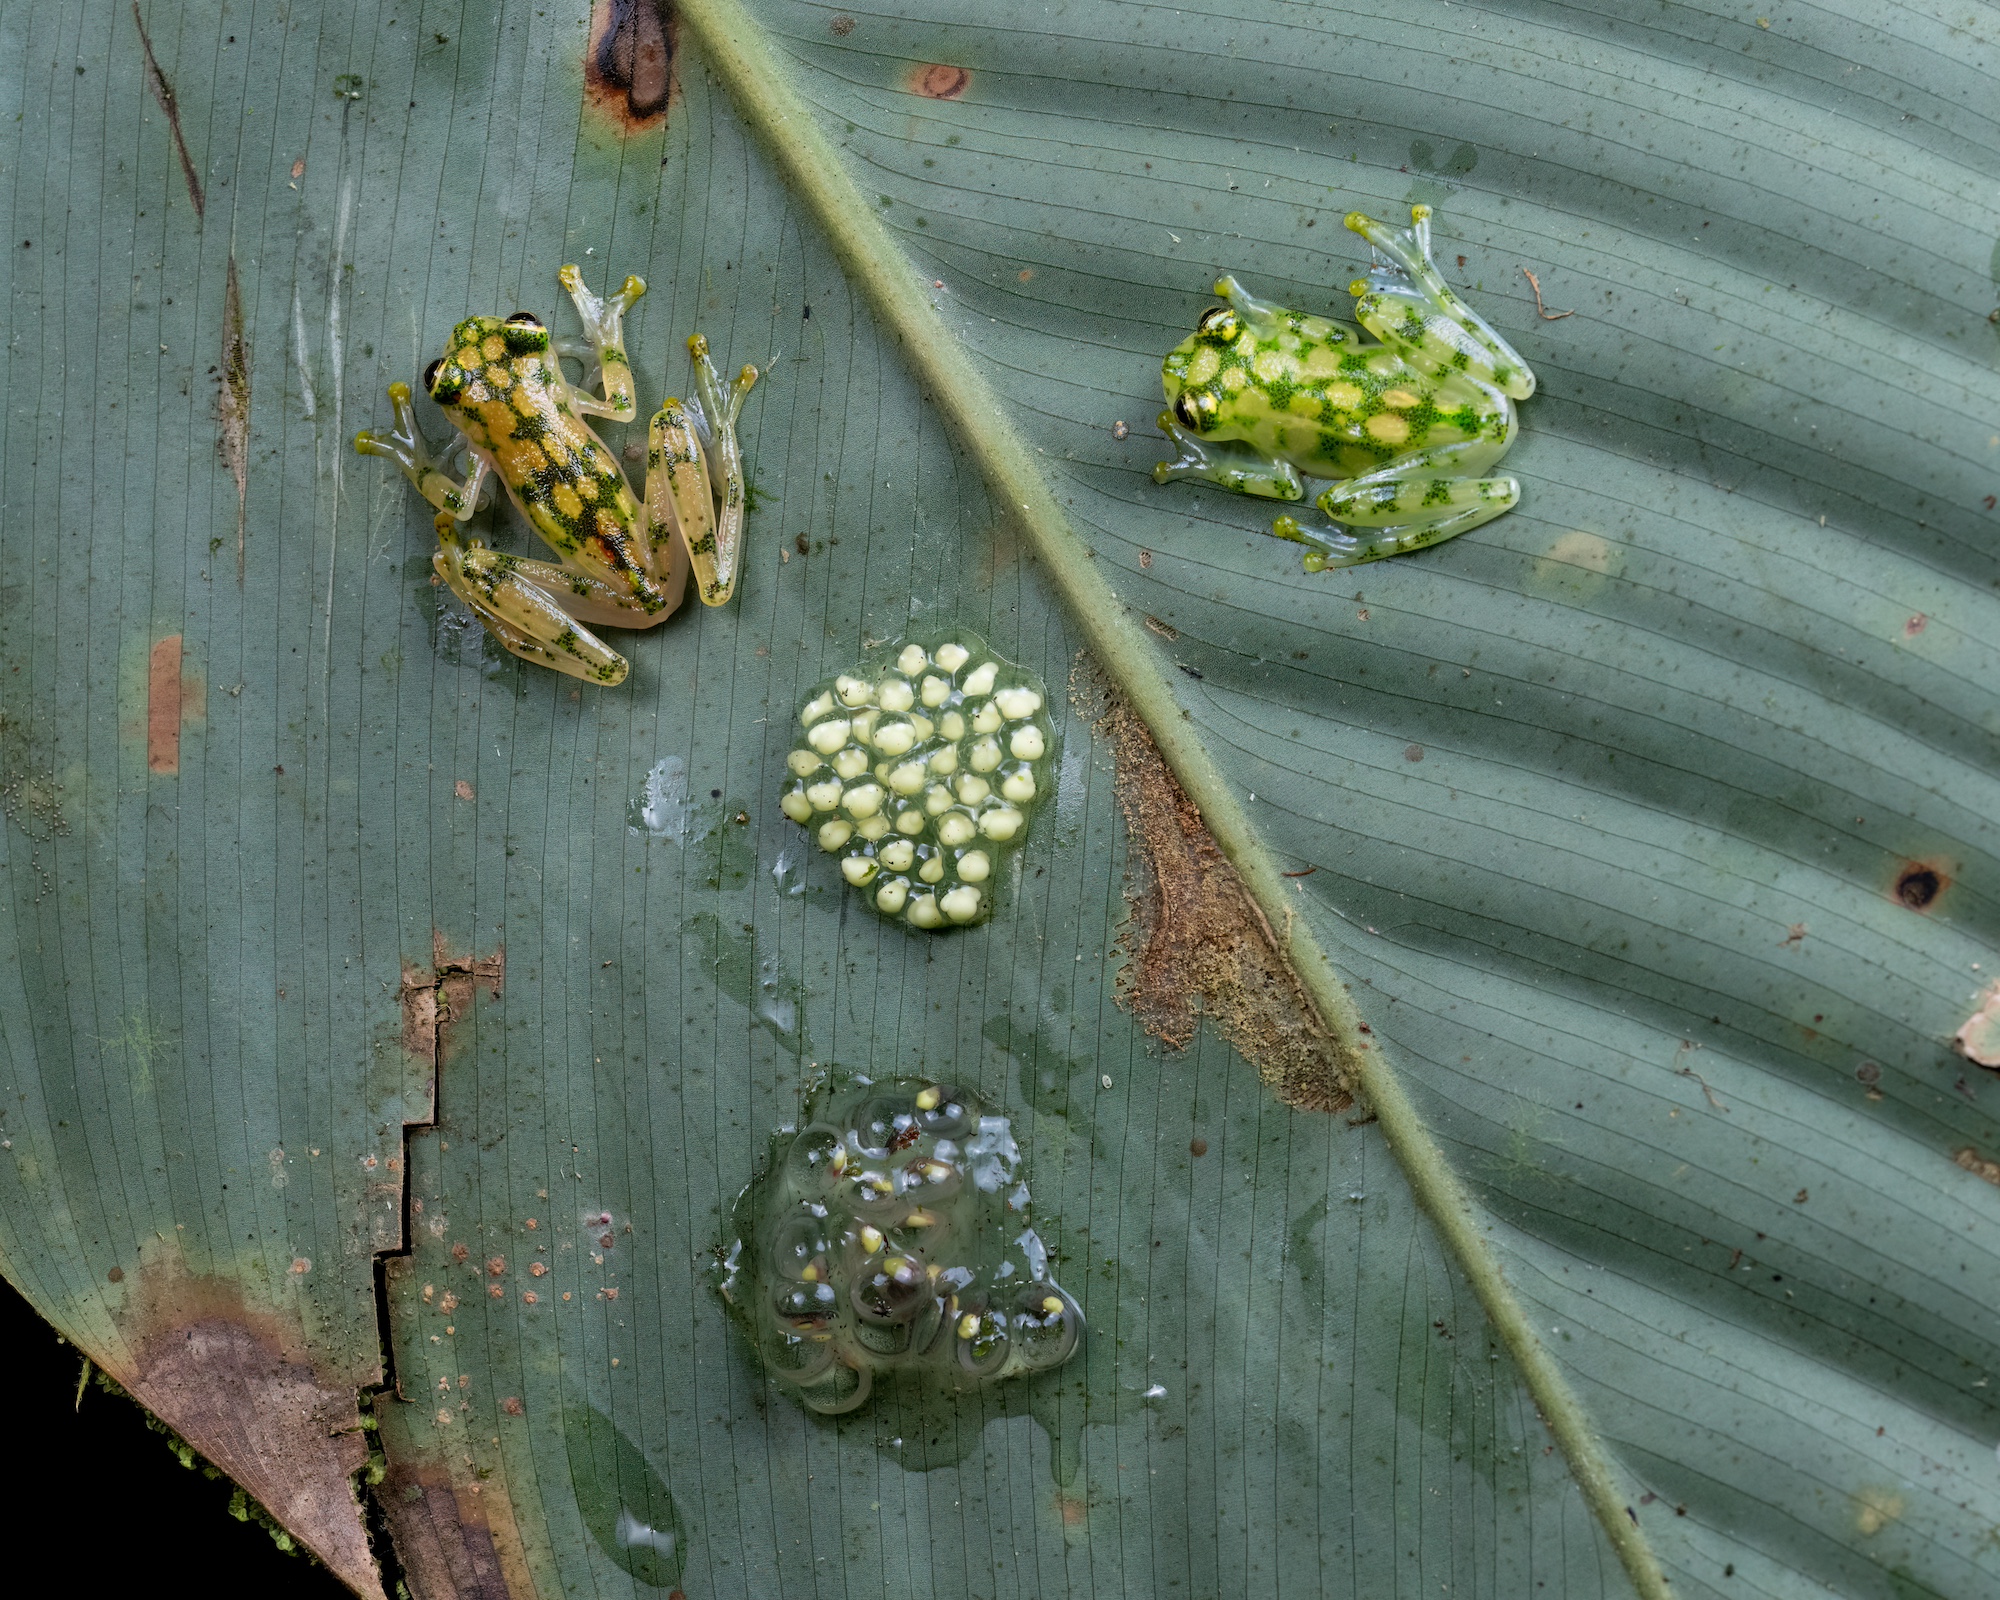 Reticulated Glass Frogs (female left, male right) and eggs on a leaf.jpg